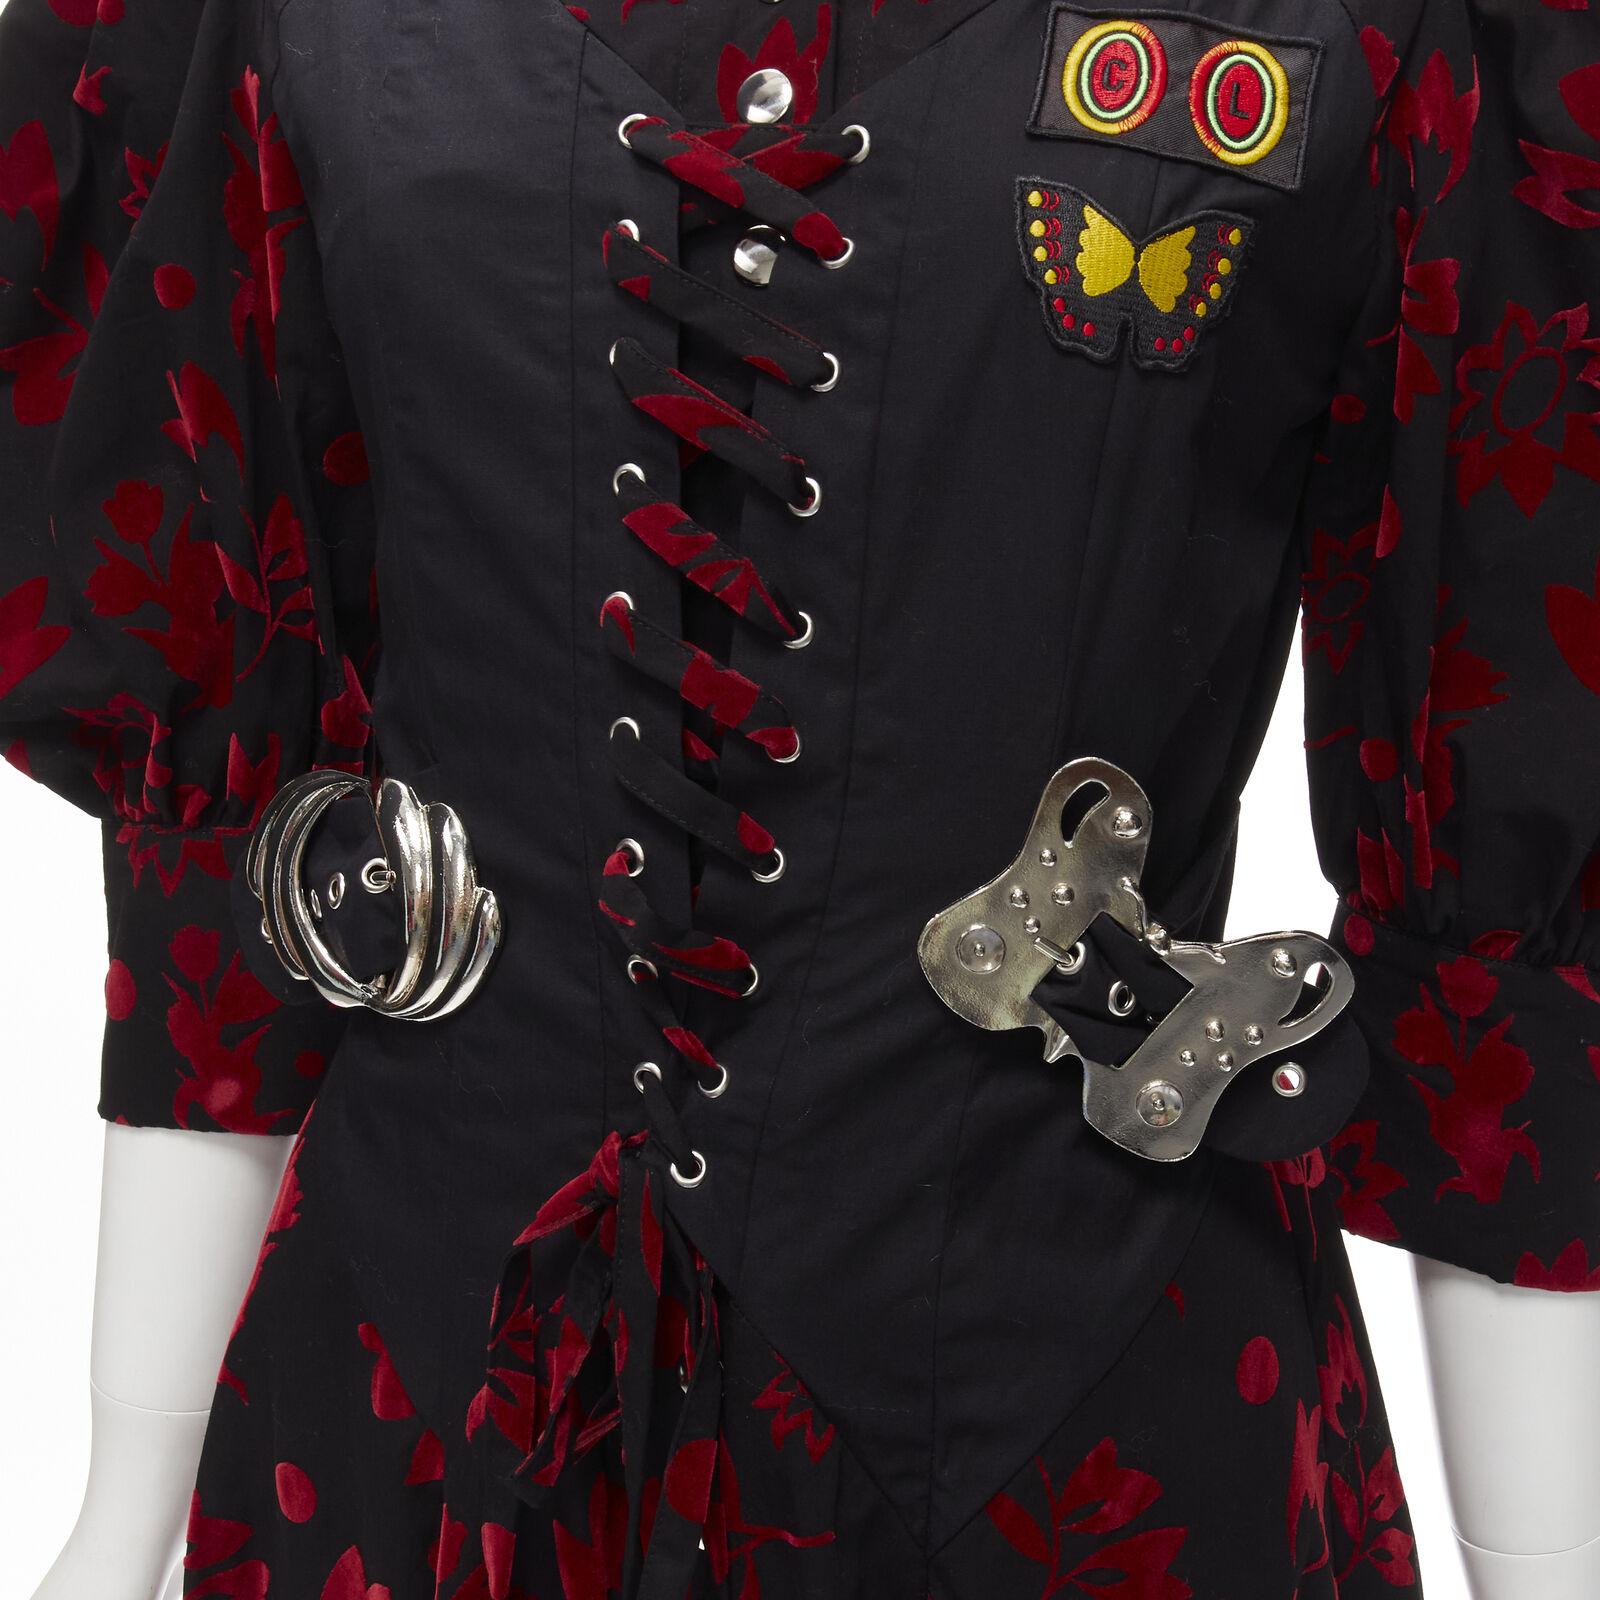 CHOPOVA LOWENA red velvet floral butterfly hook black corset Victorian dress S
Reference: AAWC/A00198
Brand: Chopova Lowena
Collection: Runway
Material: Cotton, Polyester
Color: Black, Red
Pattern: Floral
Closure: Zip
Extra Details: Snap button cuff